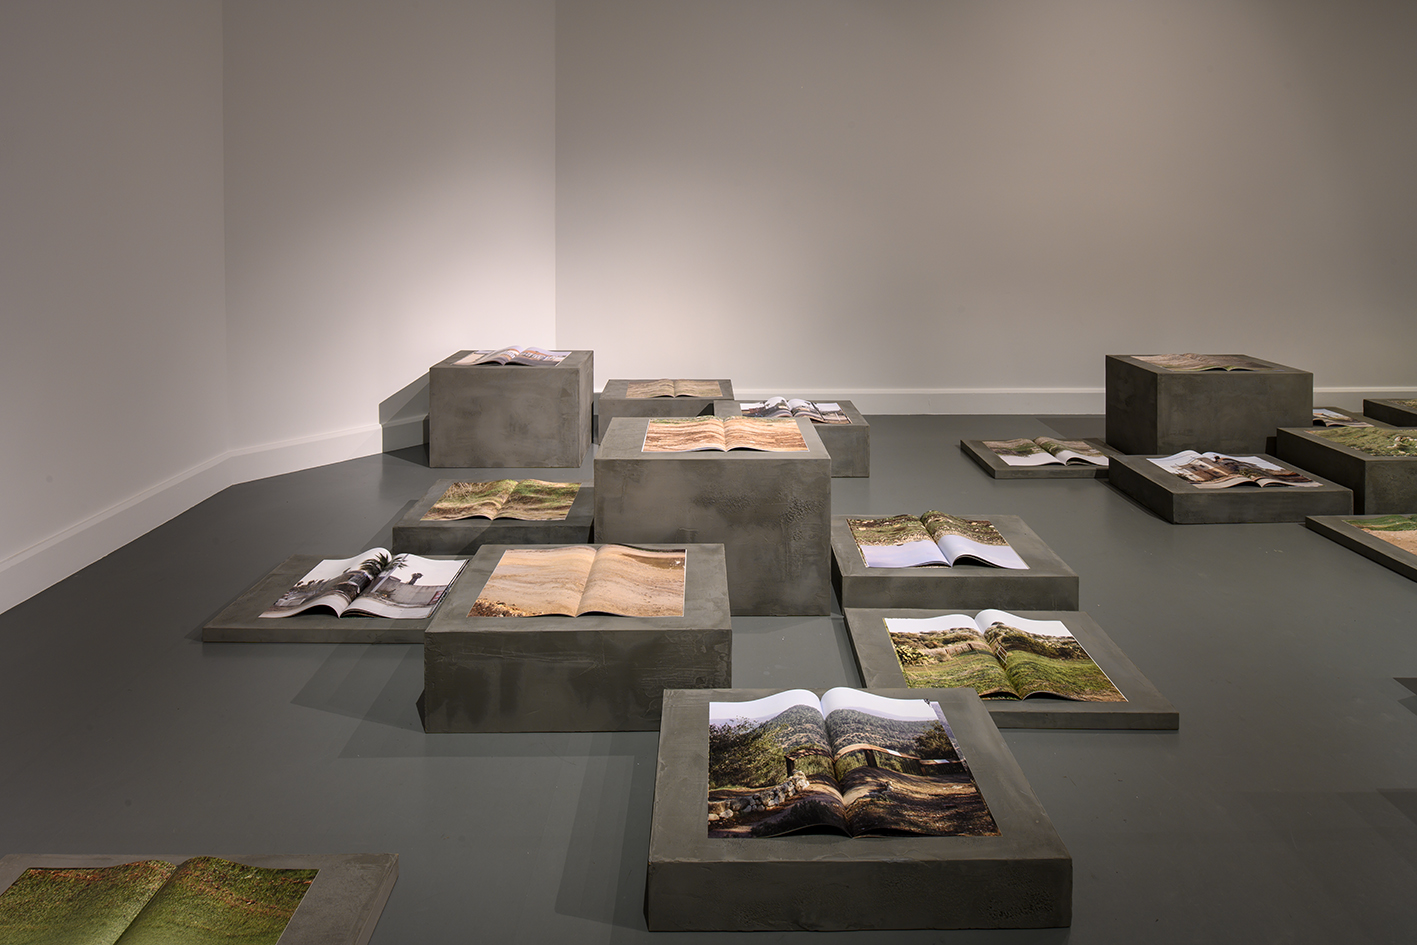 VanAbbe Museum, Eindhoven, 2018, 44 booklets of 44 palestinian villages and 16 light boxes of Dheisheh refugee camp